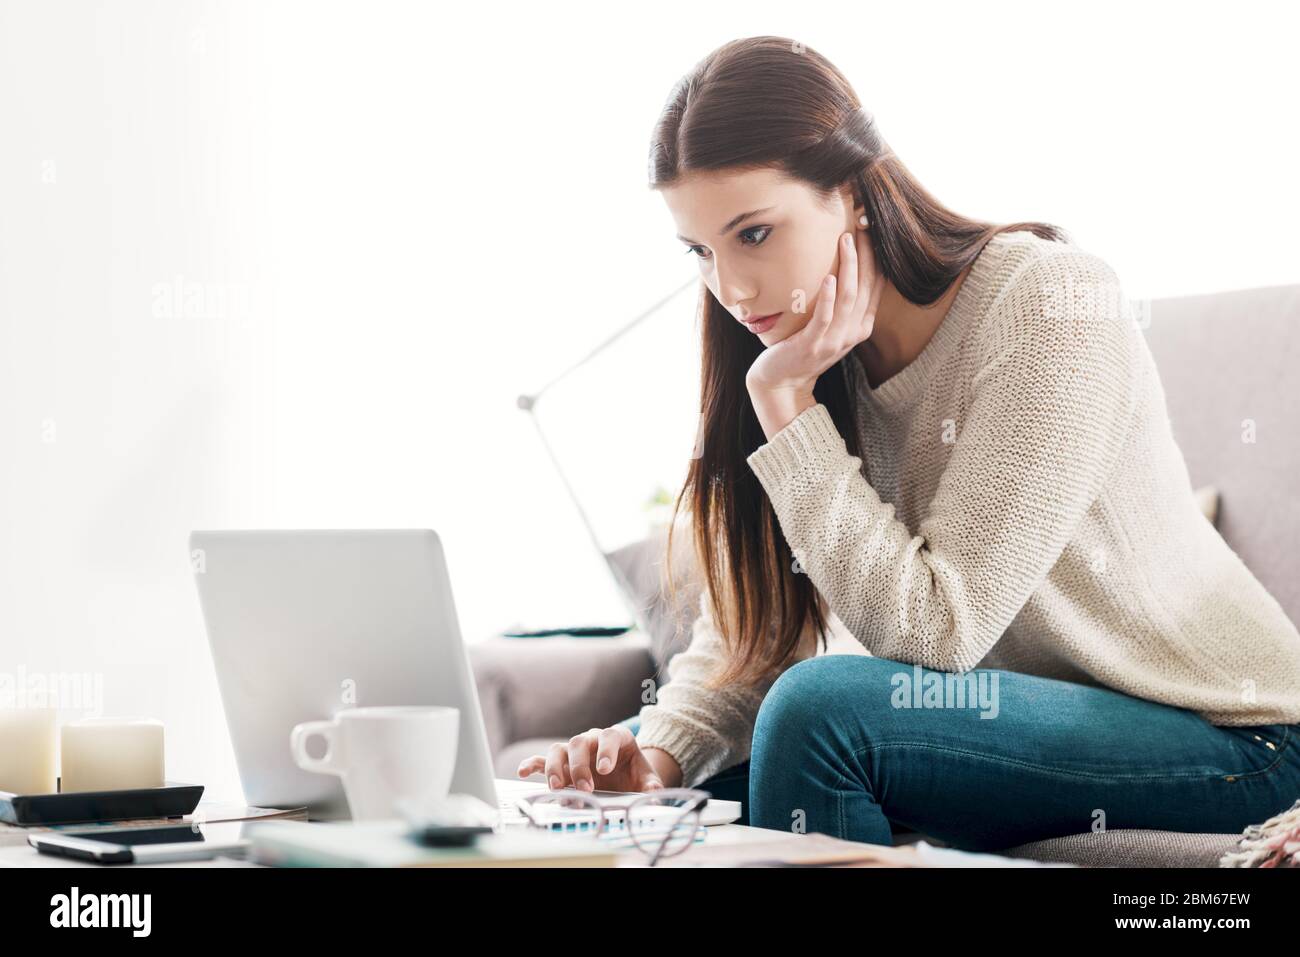 Girl relaxing on the couch at home and using a laptop, technology and communication concept Stock Photo